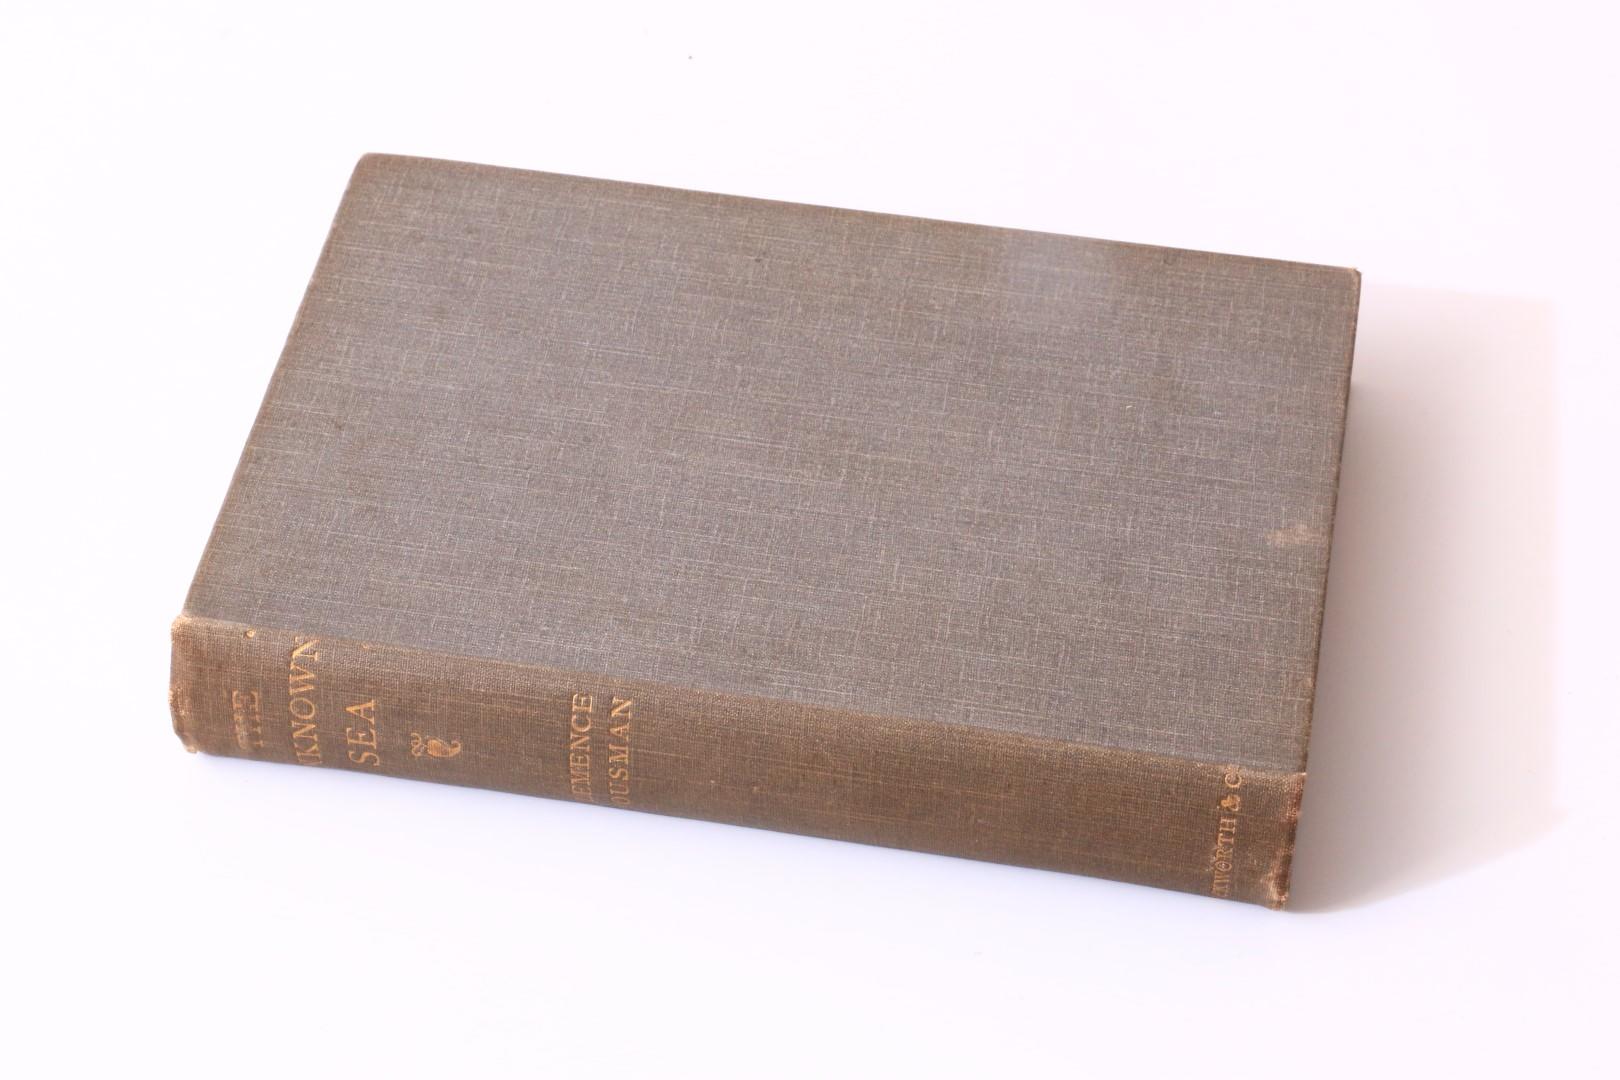 Clemence Housman - The Unknown Sea - Duckworth, 1898, First Edition.